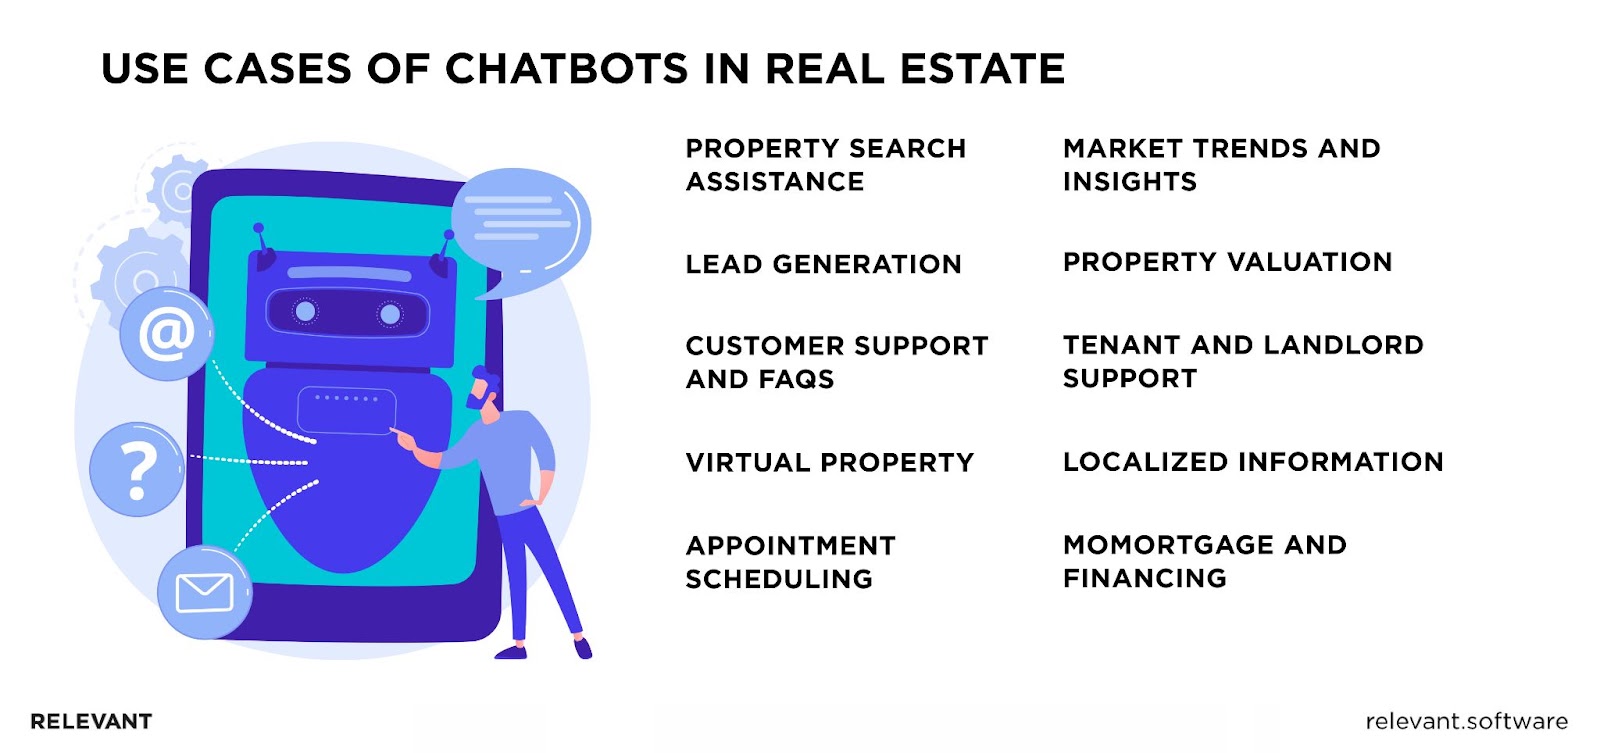 Use Cases of Chatbots in Real Estate